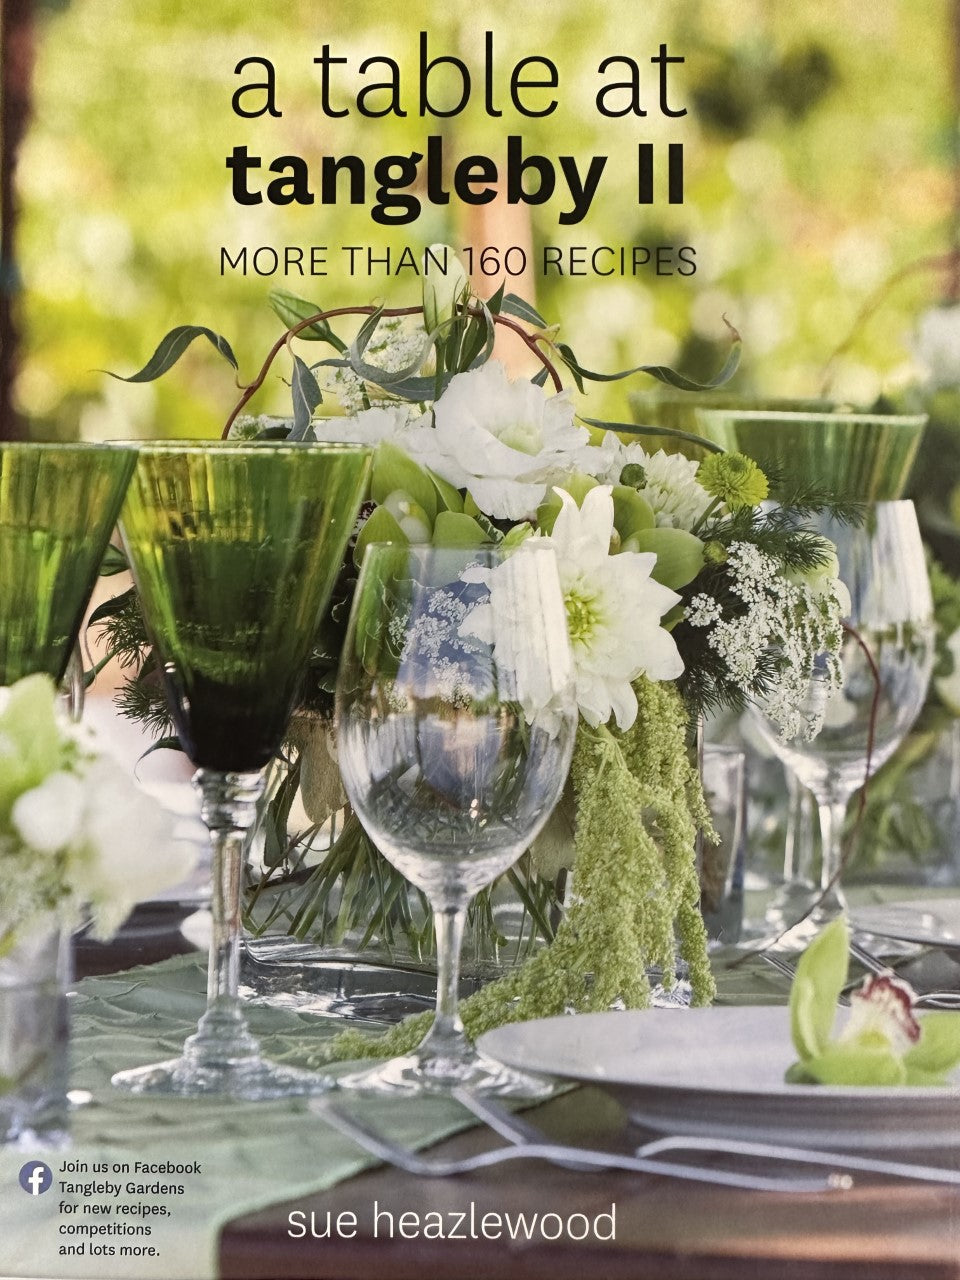 A Tale at Tangleby II Book